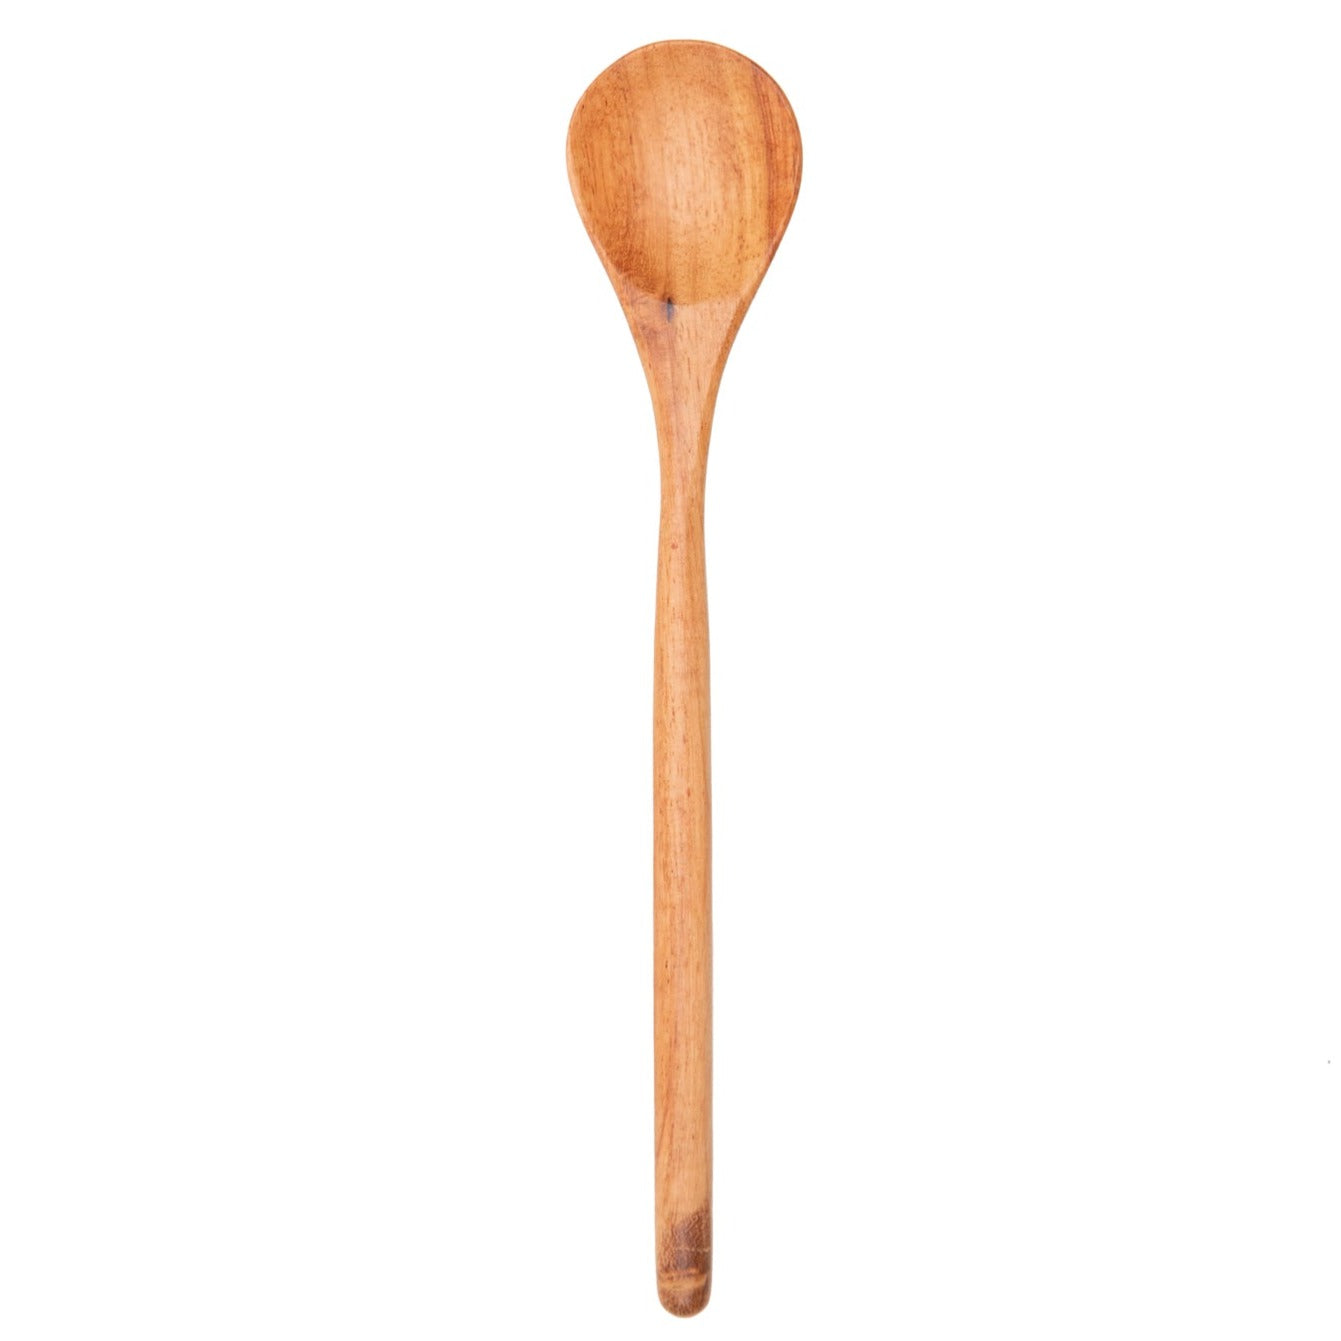 Maca Wood Hand Carved Wood Stirring Spoon - Handmade, Sustainable and Fair trade